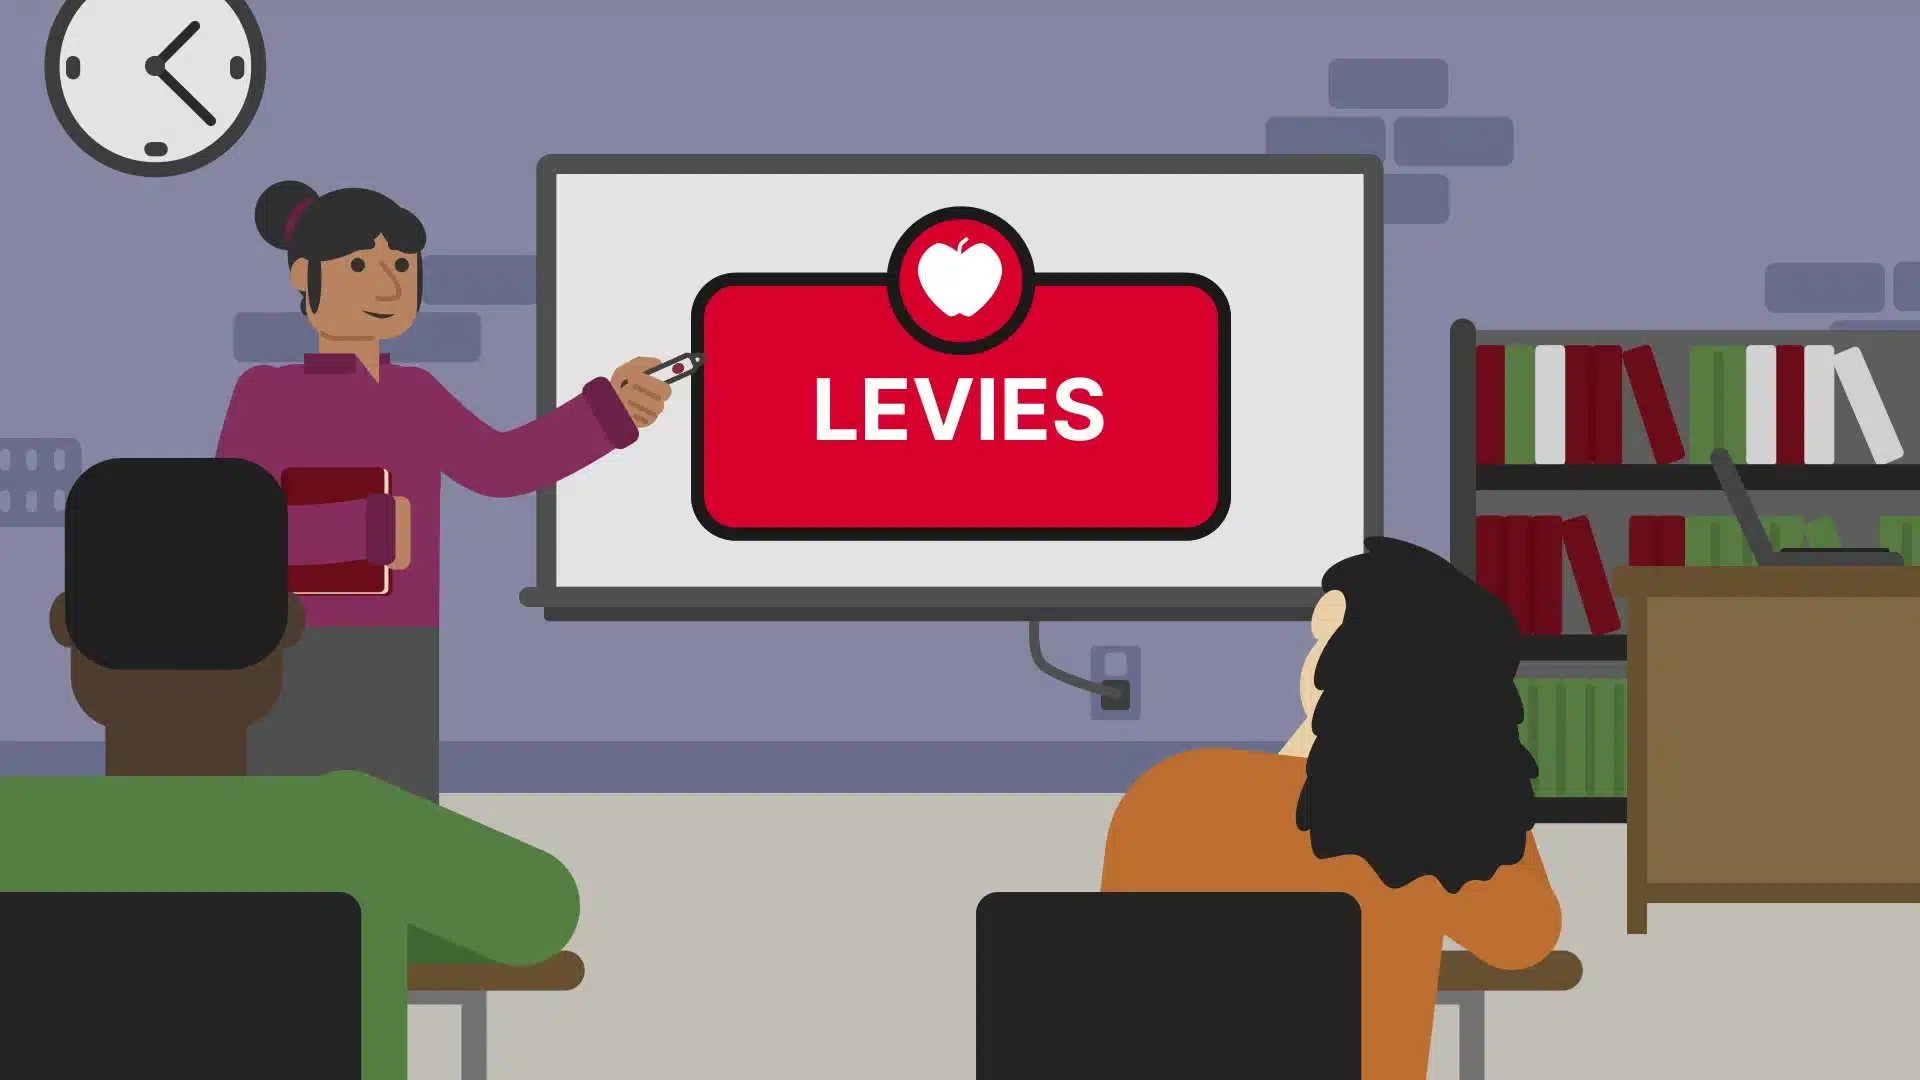 Teacher in front of a classroom pointing to a board that says "levies"